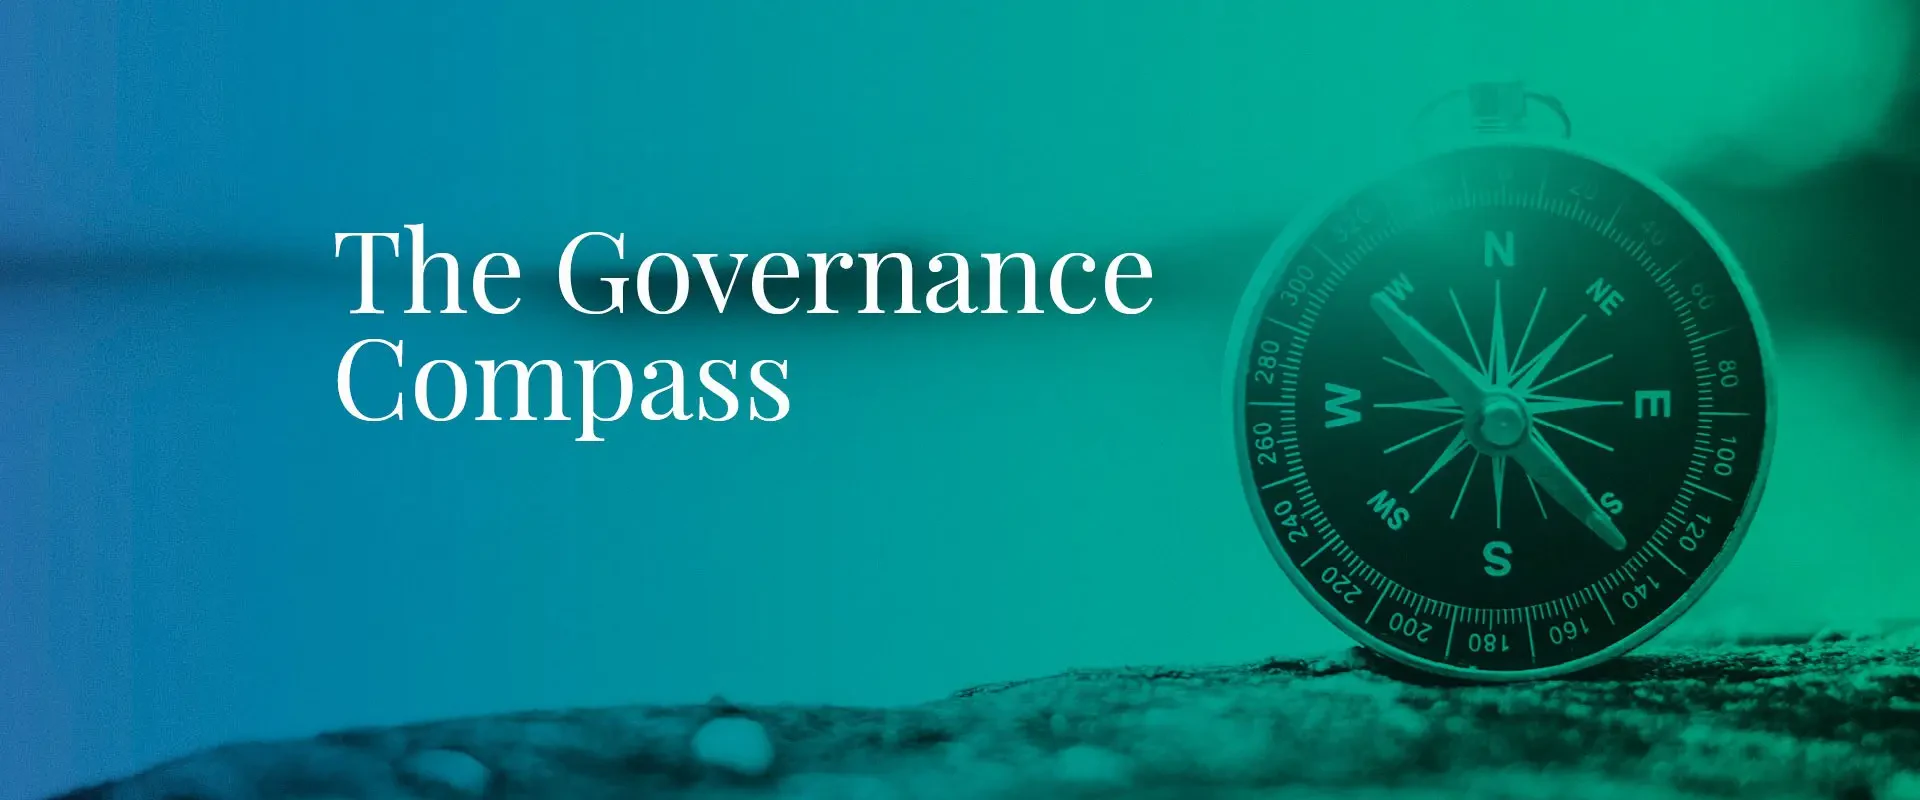 The Governance Compass